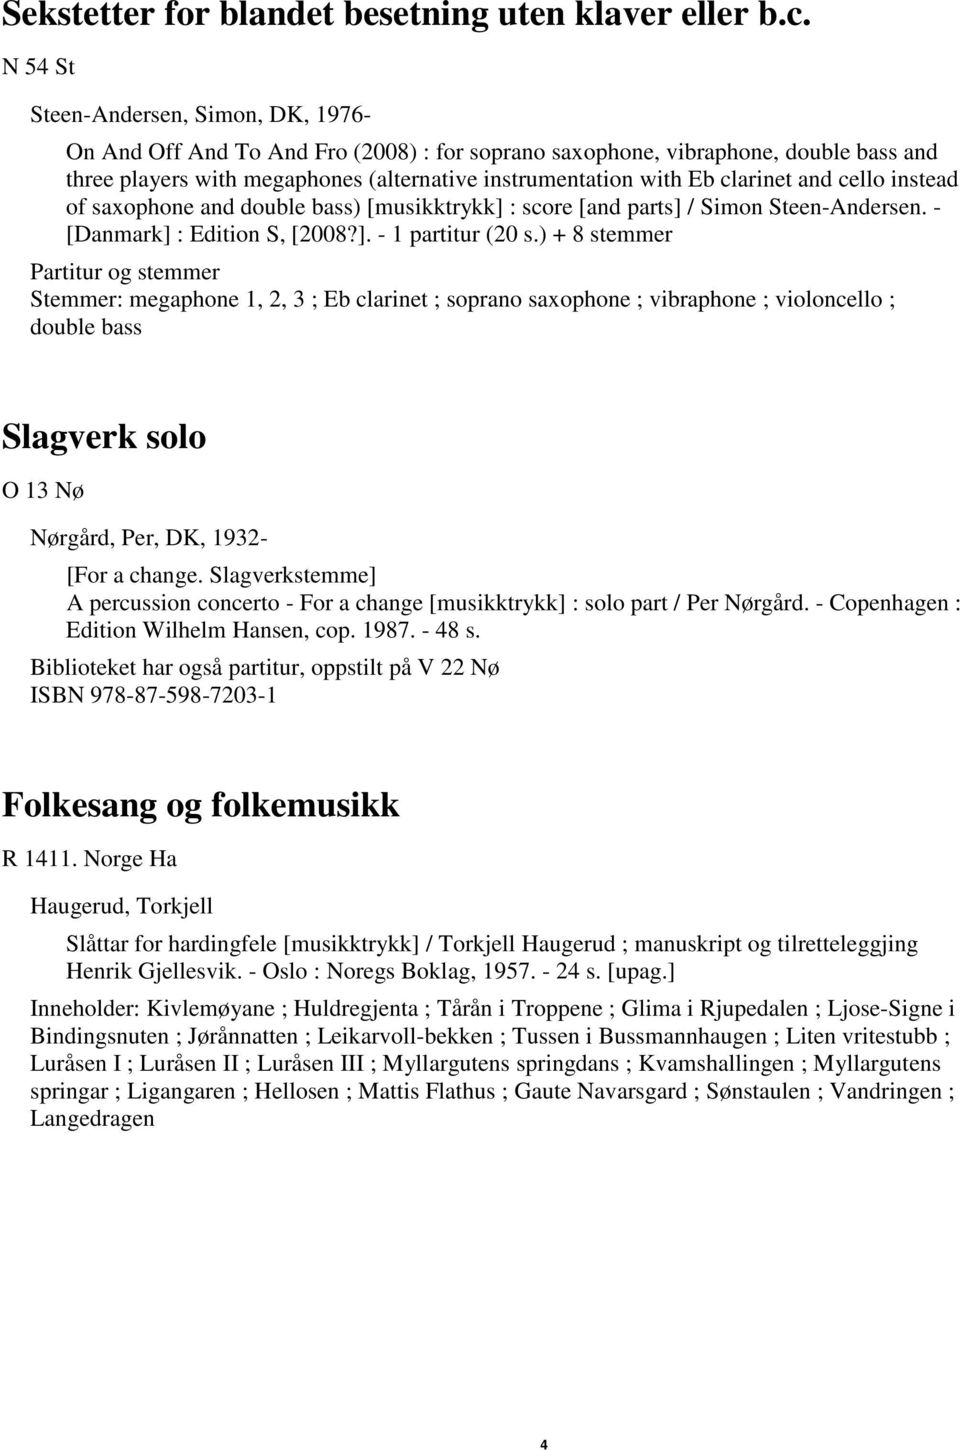 clarinet and cello instead of saxophone and double bass) [musikktrykk] : score [and parts] / Simon Steen-Andersen. - [Danmark] : Edition S, [2008?]. - 1 partitur (20 s.